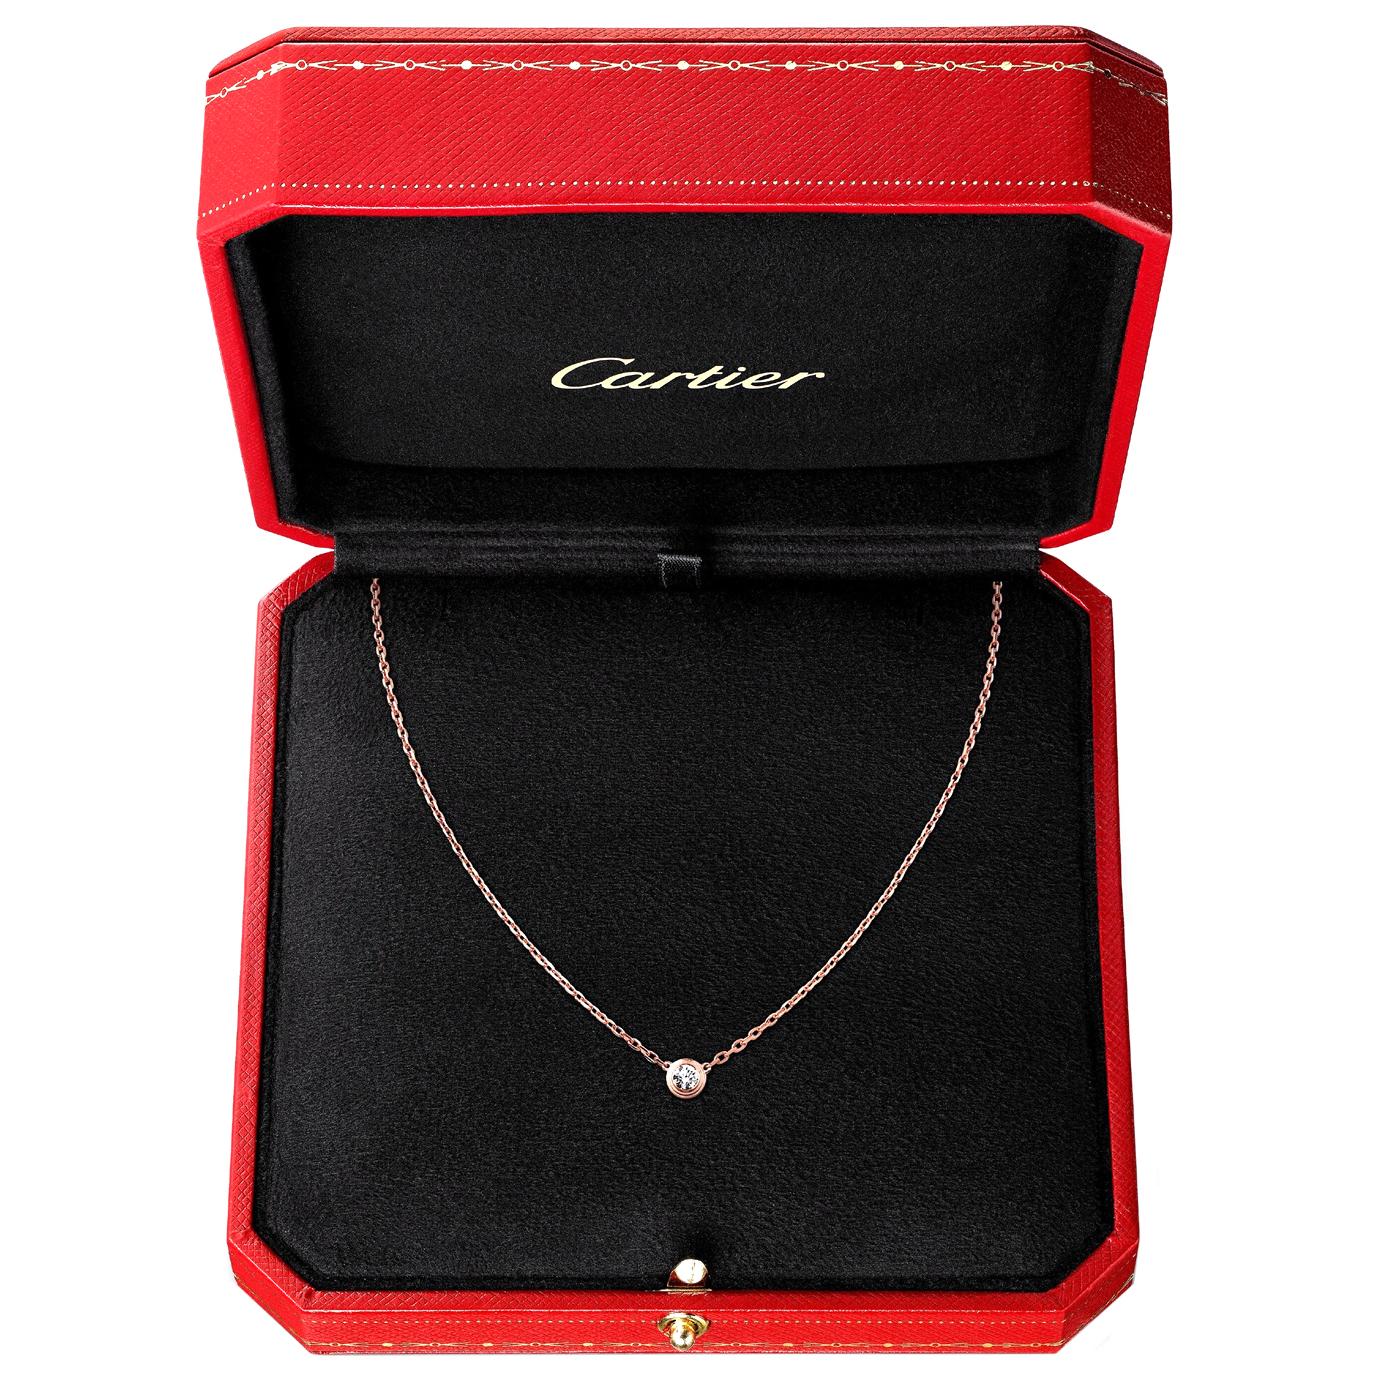 Cartier D'Amour 0.09ct Diamond Small Model Pendant Necklace 18K Rose Gold In New Condition For Sale In Aventura, FL